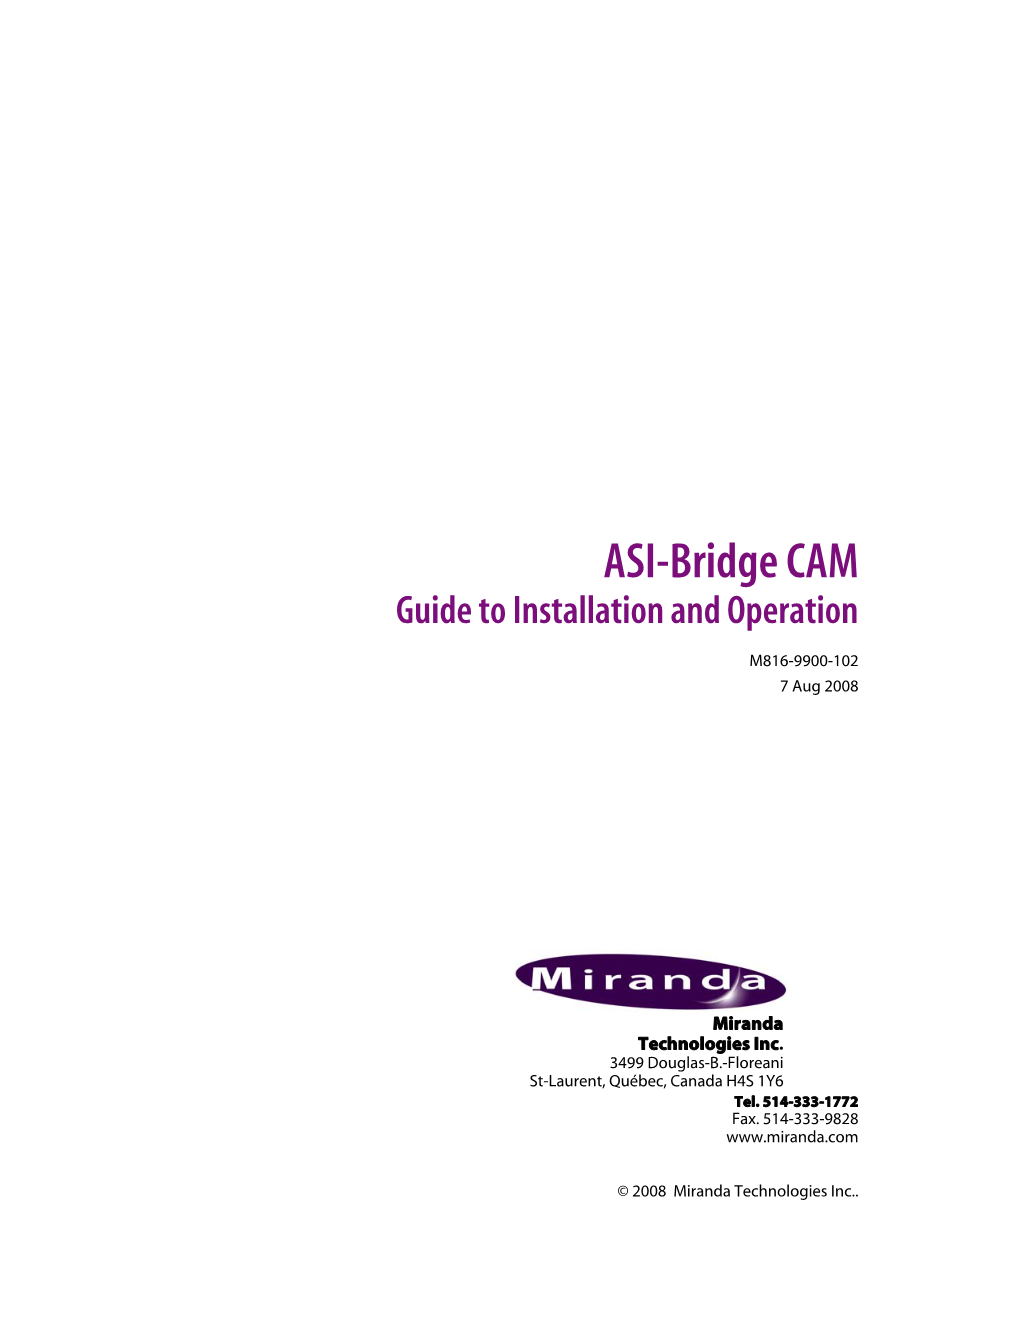 ASI-Bridge CAM Guide to Installation and Operation